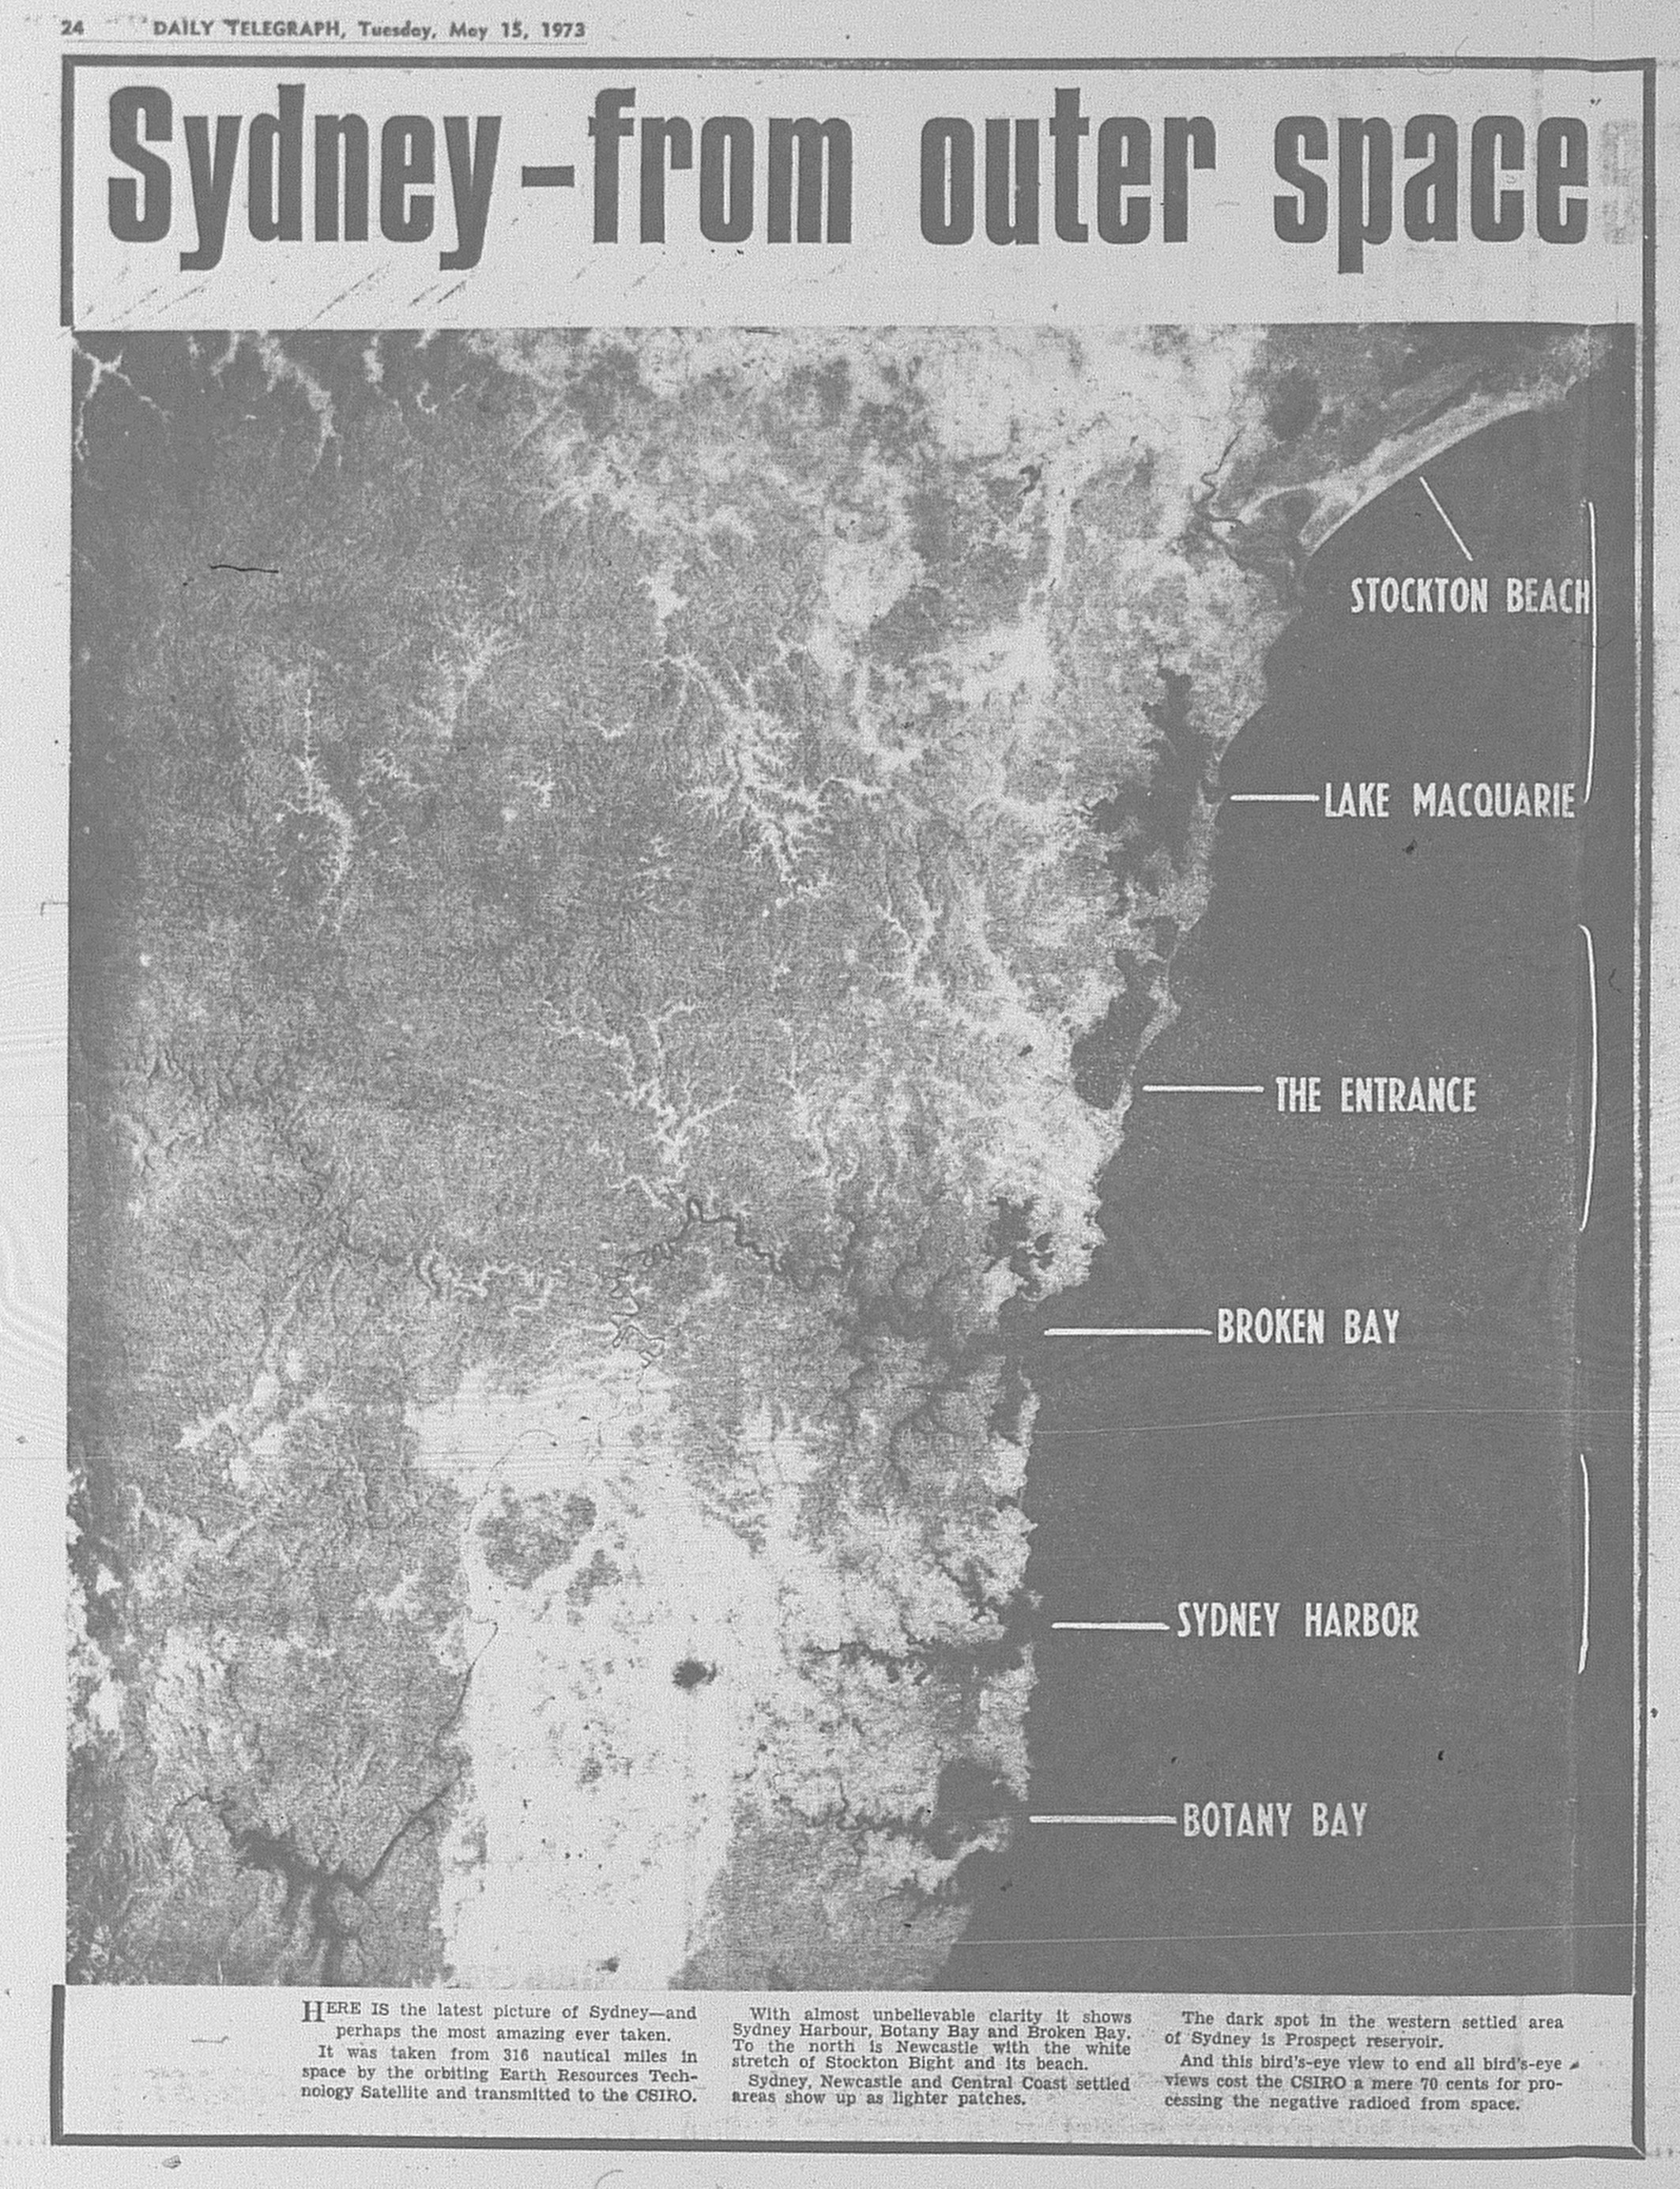 Sydney Aerial May 15 1973 daily telegraph 24